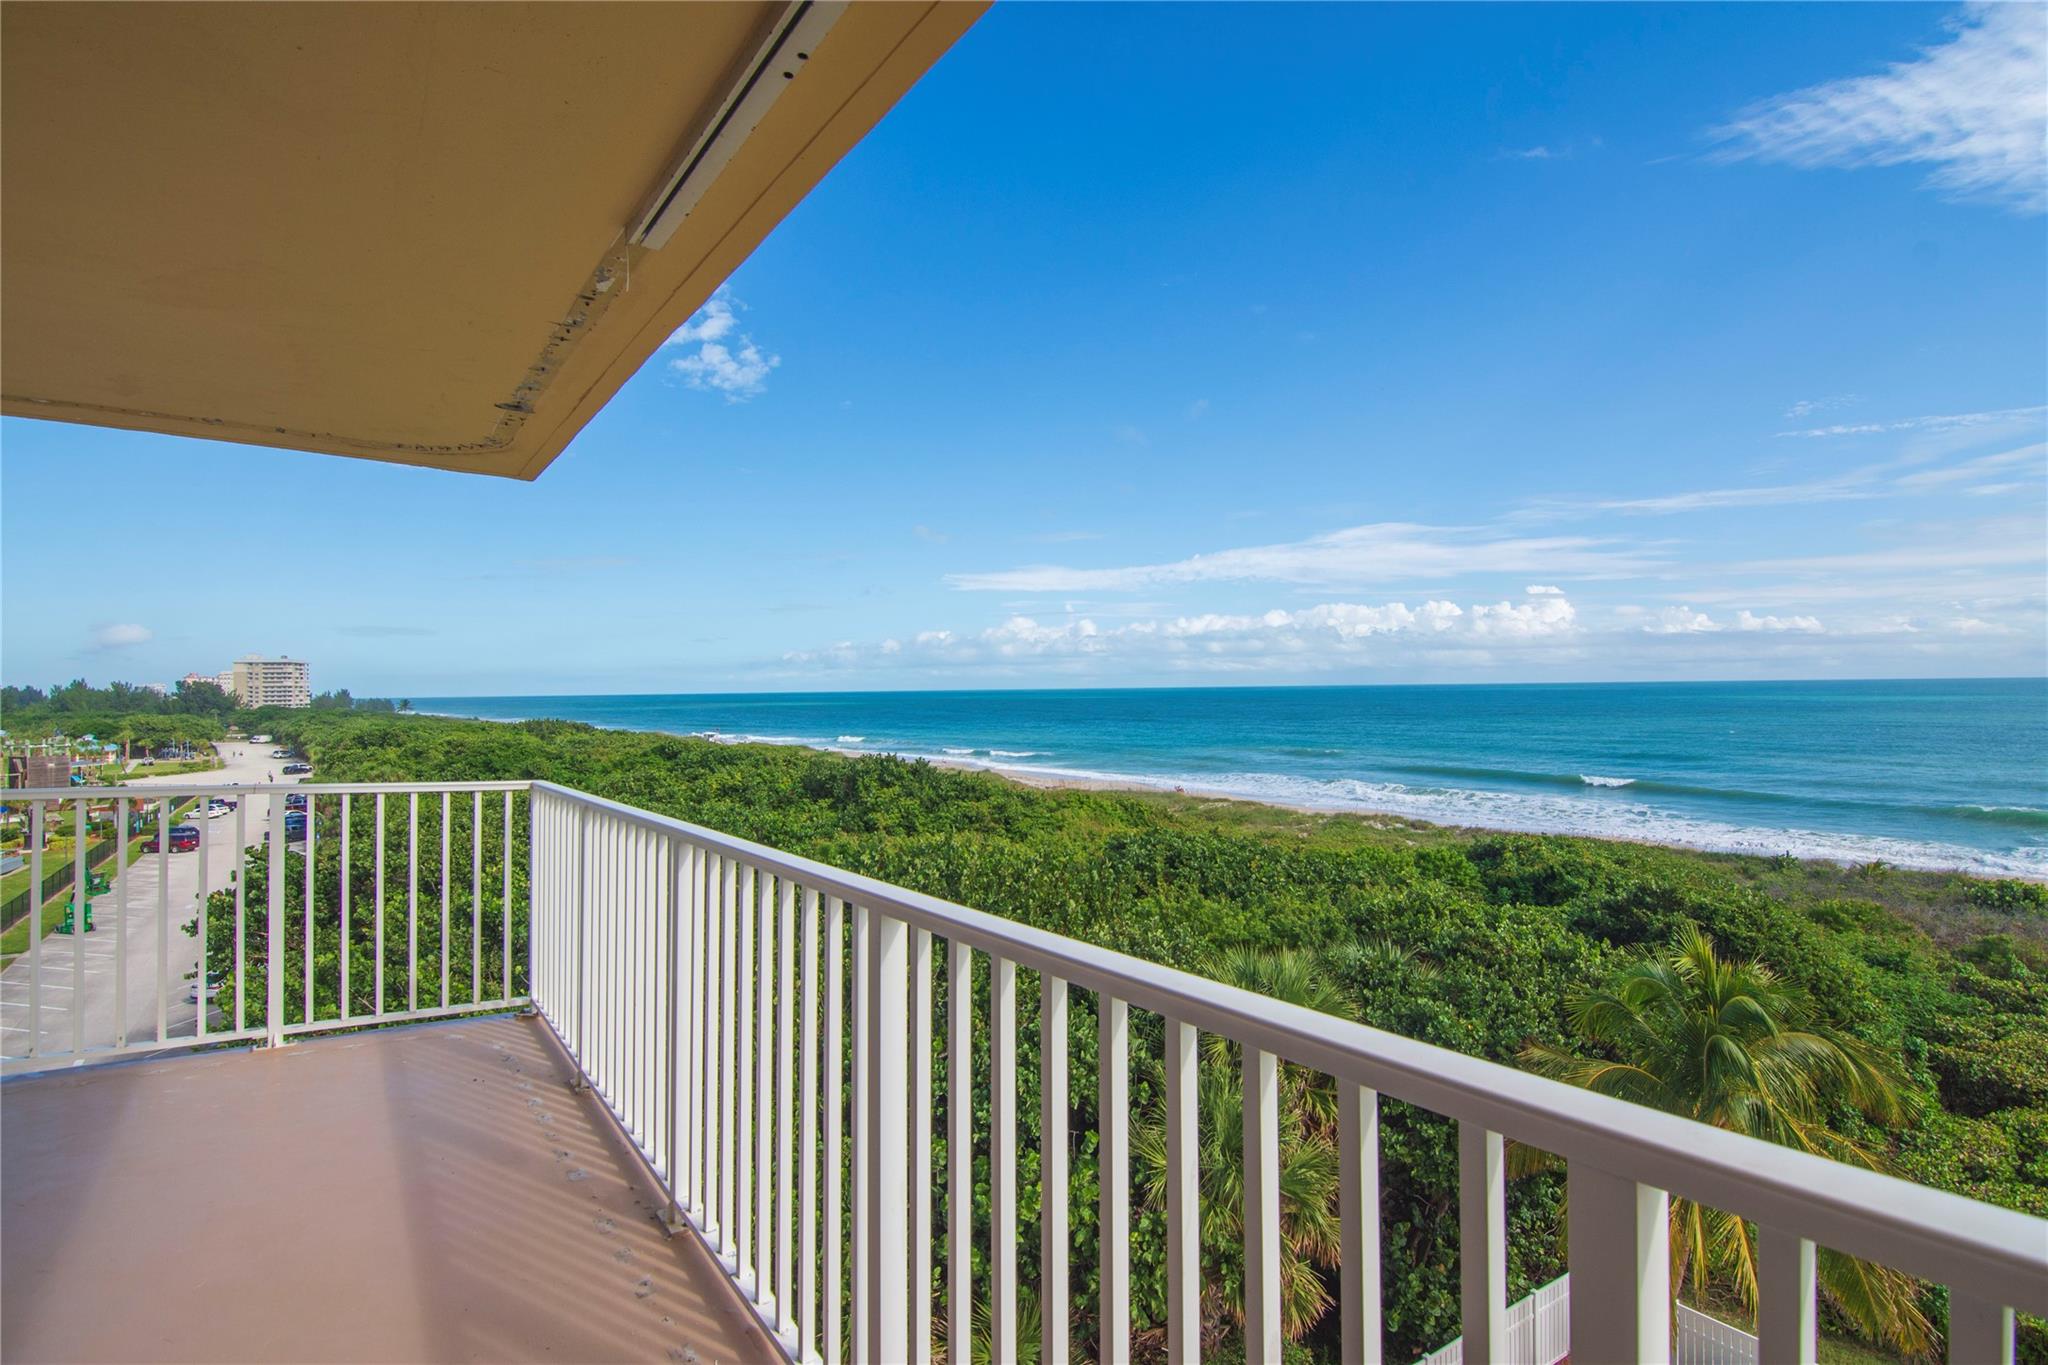 Oustanding condo in sought-after Sea Palms. The views are spectacular! Look north up the beach for miles past the Navy Seal Museum, enjoy unobstructed ocean views offering incredible sunrises, & see d'town Ft Pierce & the intracoastal from your front door. Listen to the waves while having coffee on your wrap-around balcony or while enjoying a good book from your sofa. This home has been tastefully updated & being sold turn-key. Updates include tile thru-out, granite counters, new lighting, & newer A/C & hot water heater (2021). Pipes, balcony, & new hurricane shutters all re-done in this home. Walk out the building to private access to unspoiled beaches. Amenities include pool, club room, pickleball/tennis, & shuffle board. Residents love this community. Outstanding North Beach location!